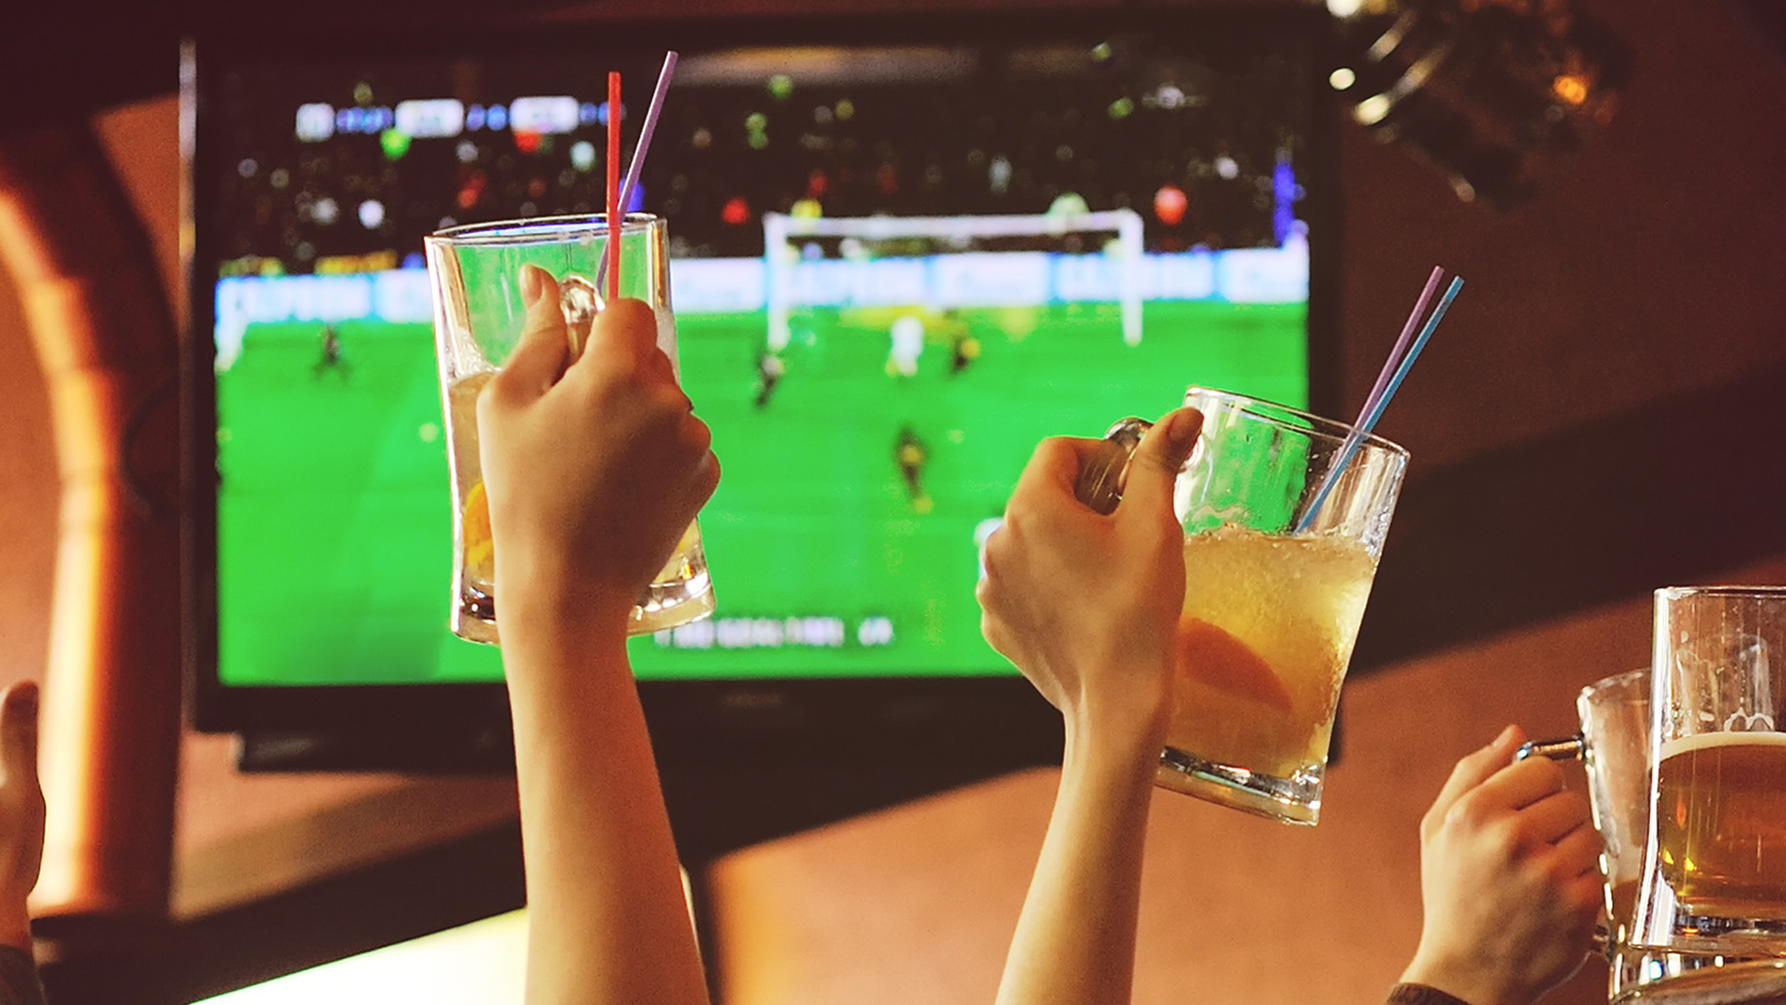 Sports fans hands holding beer glasses in front of a TV screen celebrate